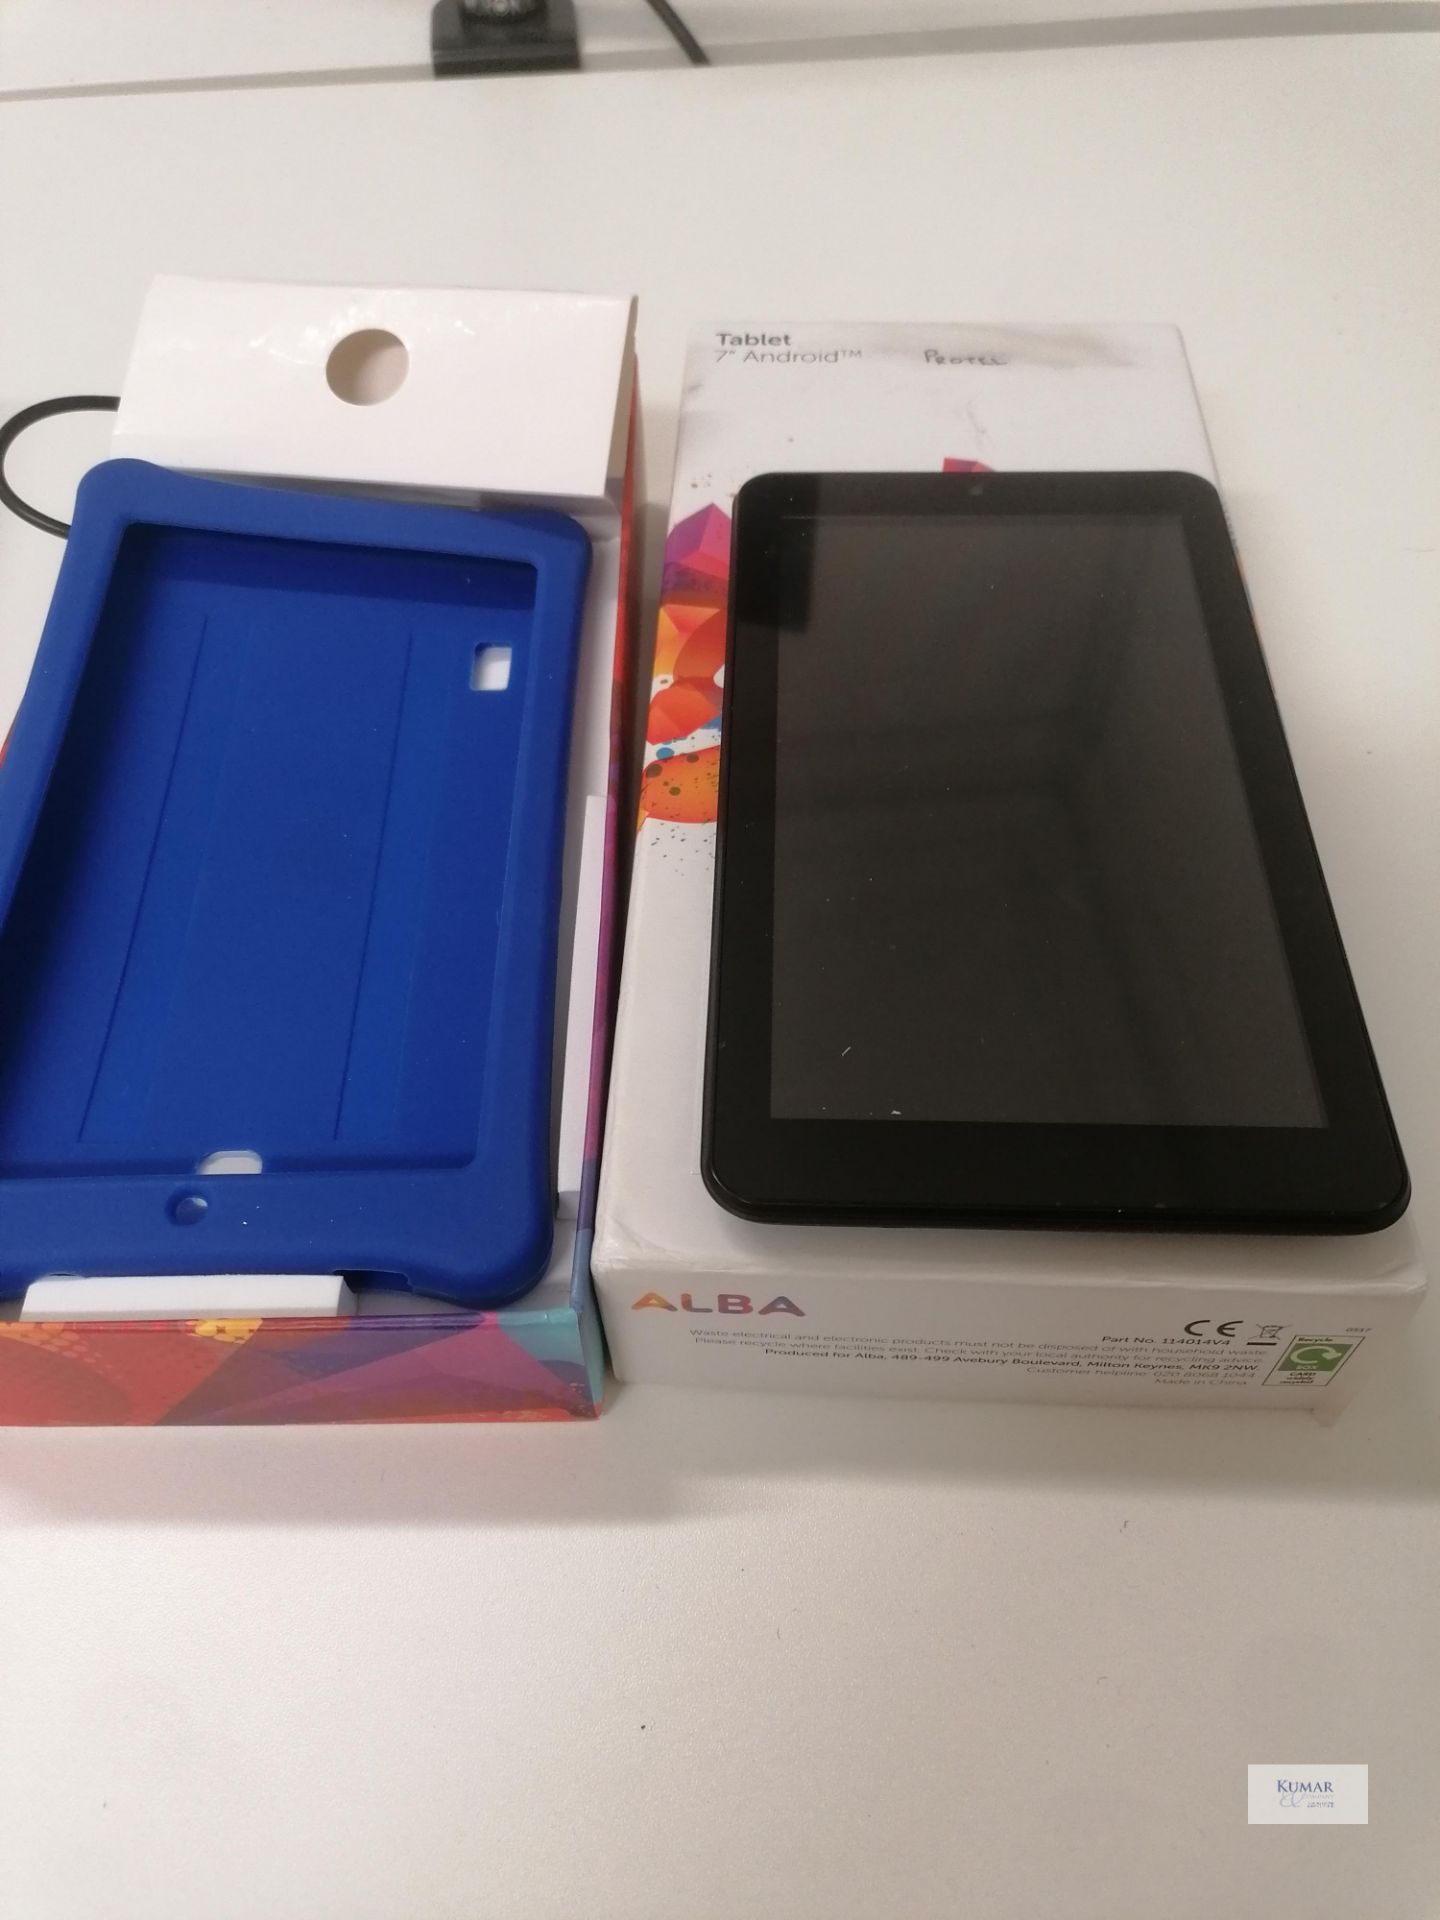 Alba Model AC07PLVS 7" Tablet with protective case,cable and charger Boxed - Image 4 of 6